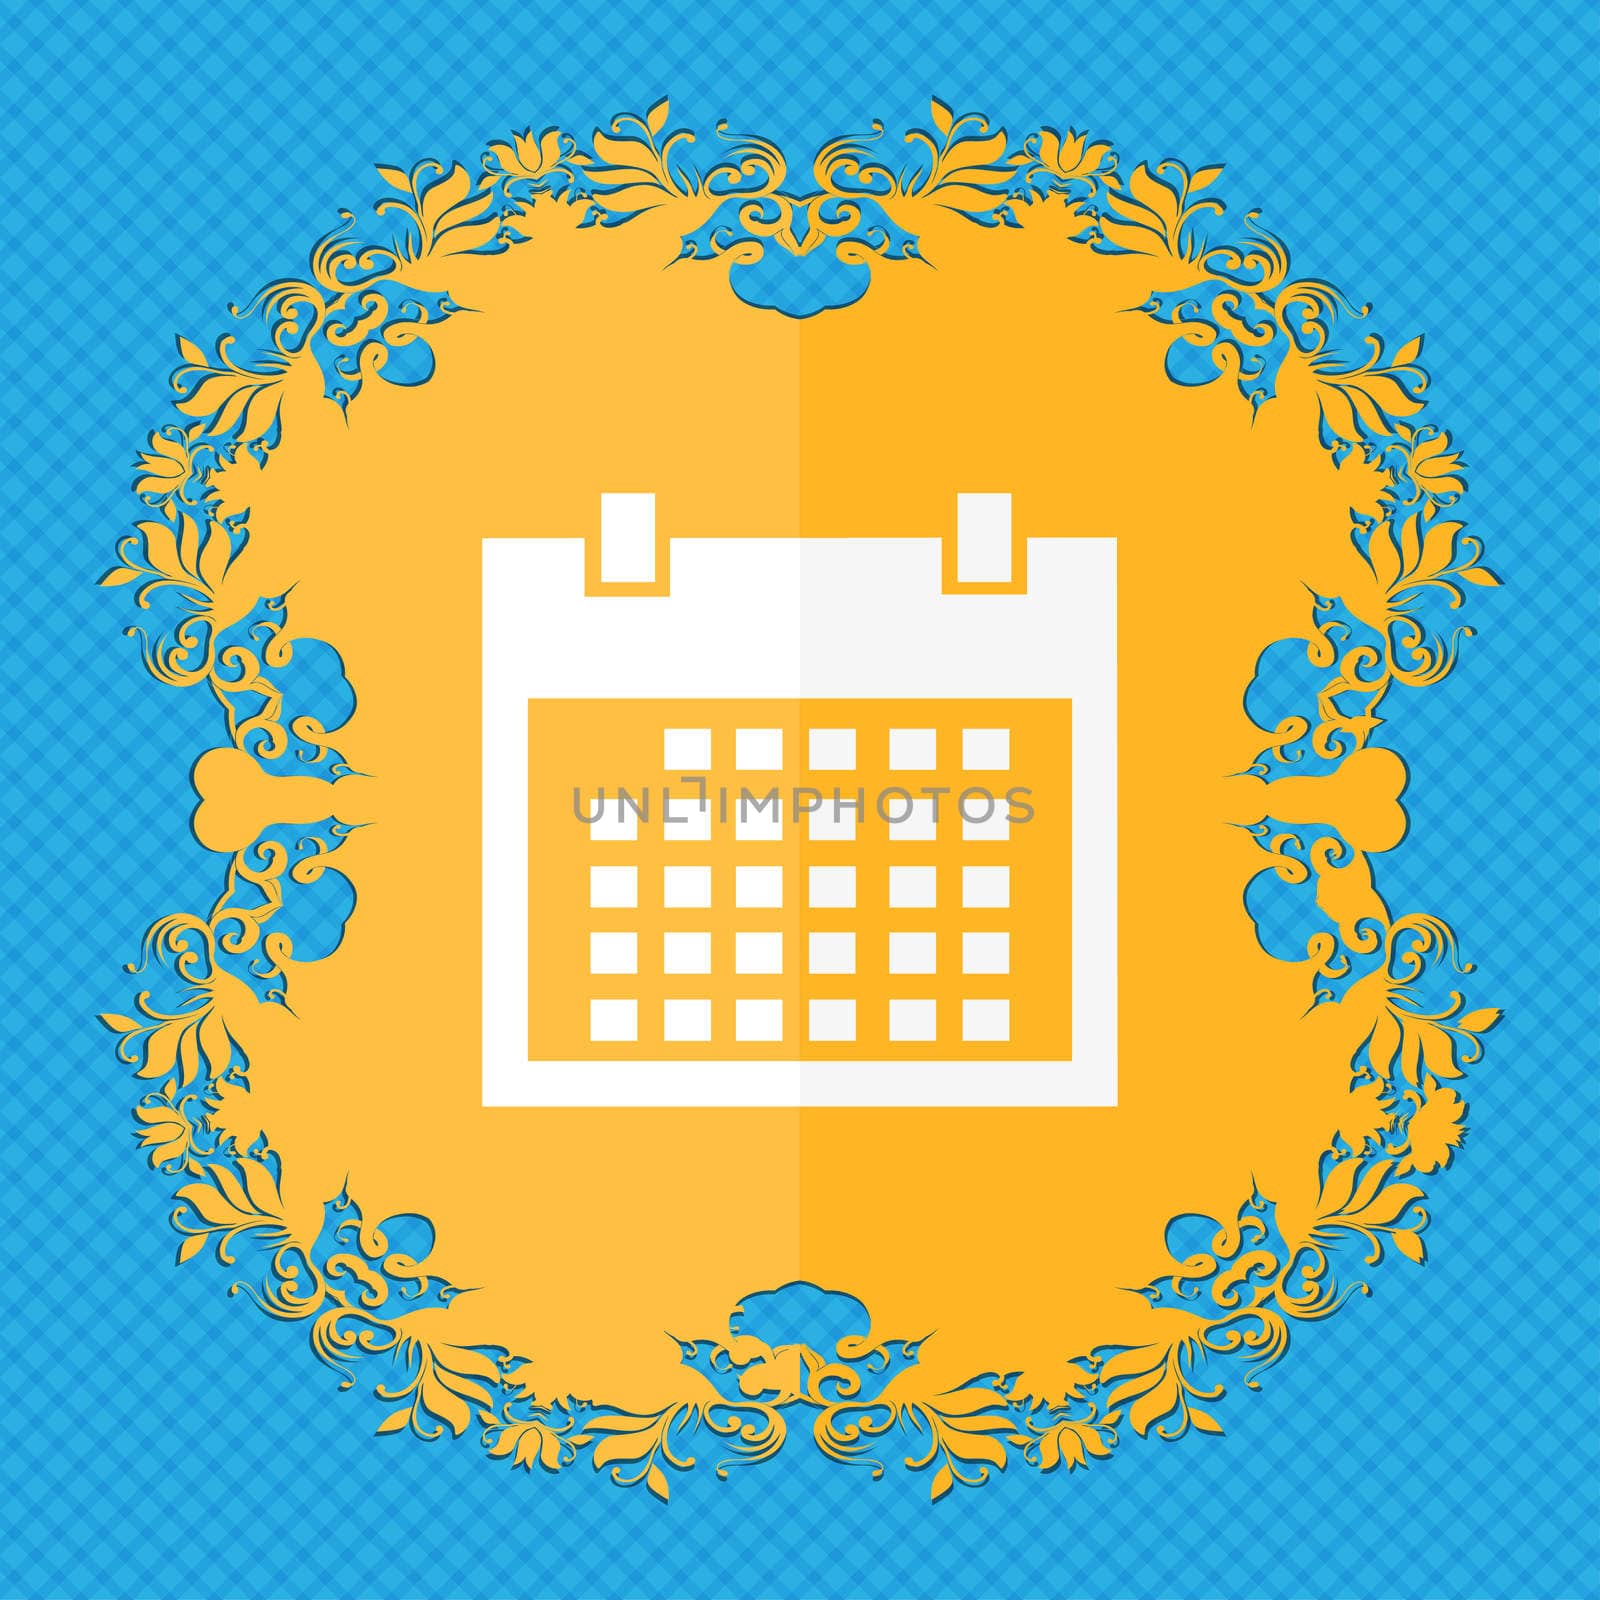 Calendar sign icon. days month symbol. Date button. Floral flat design on a blue abstract background with place for your text. illustration